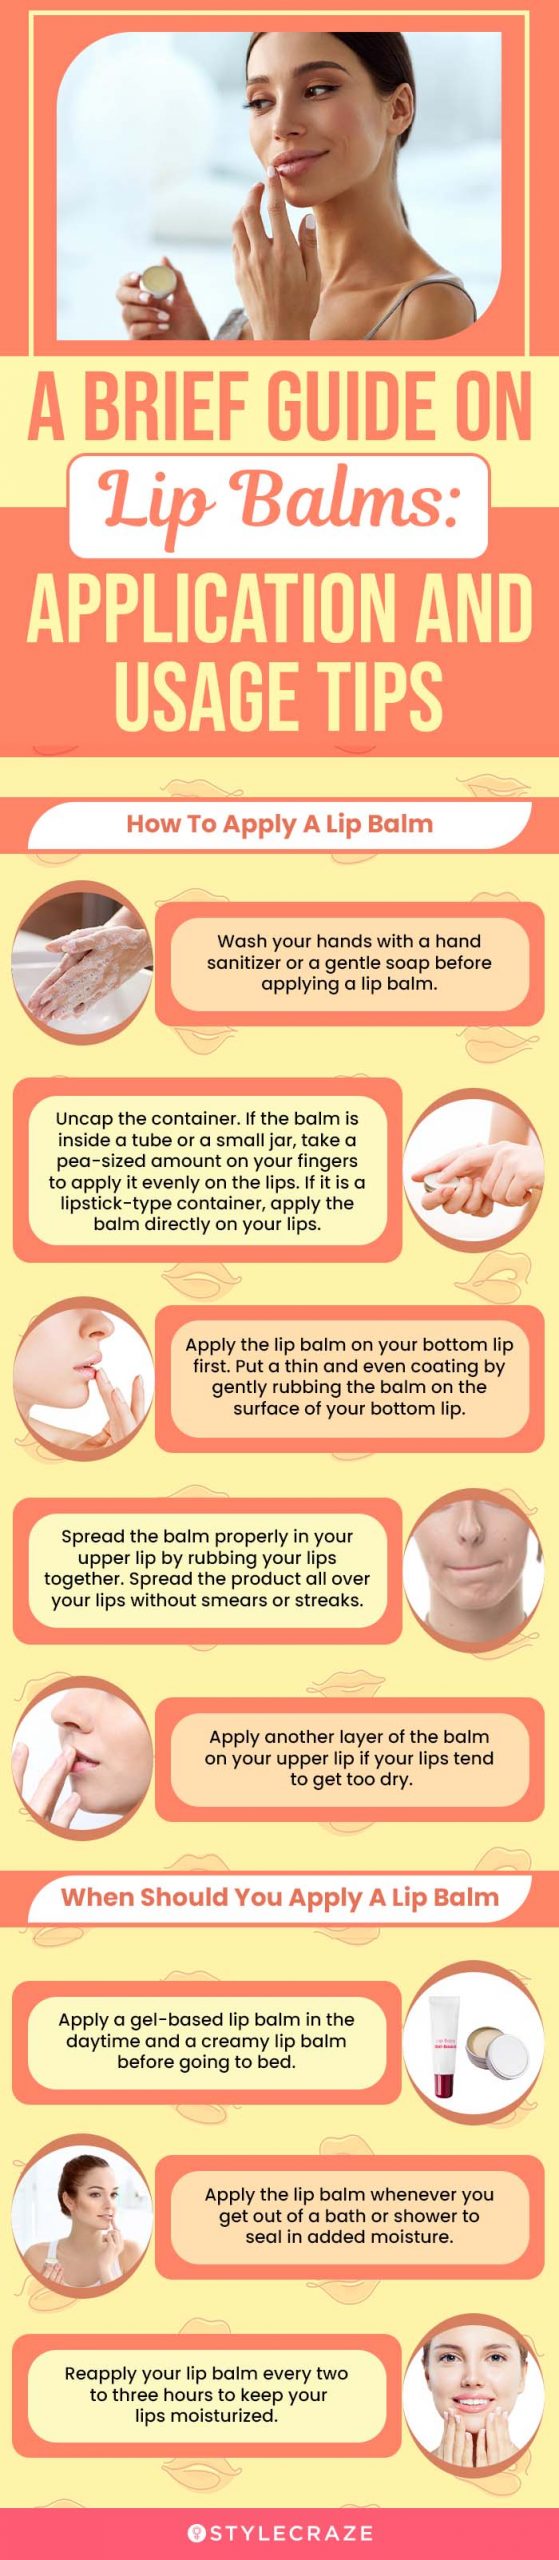 A Brief Guide On Lip Balms: Application And Usage Tips